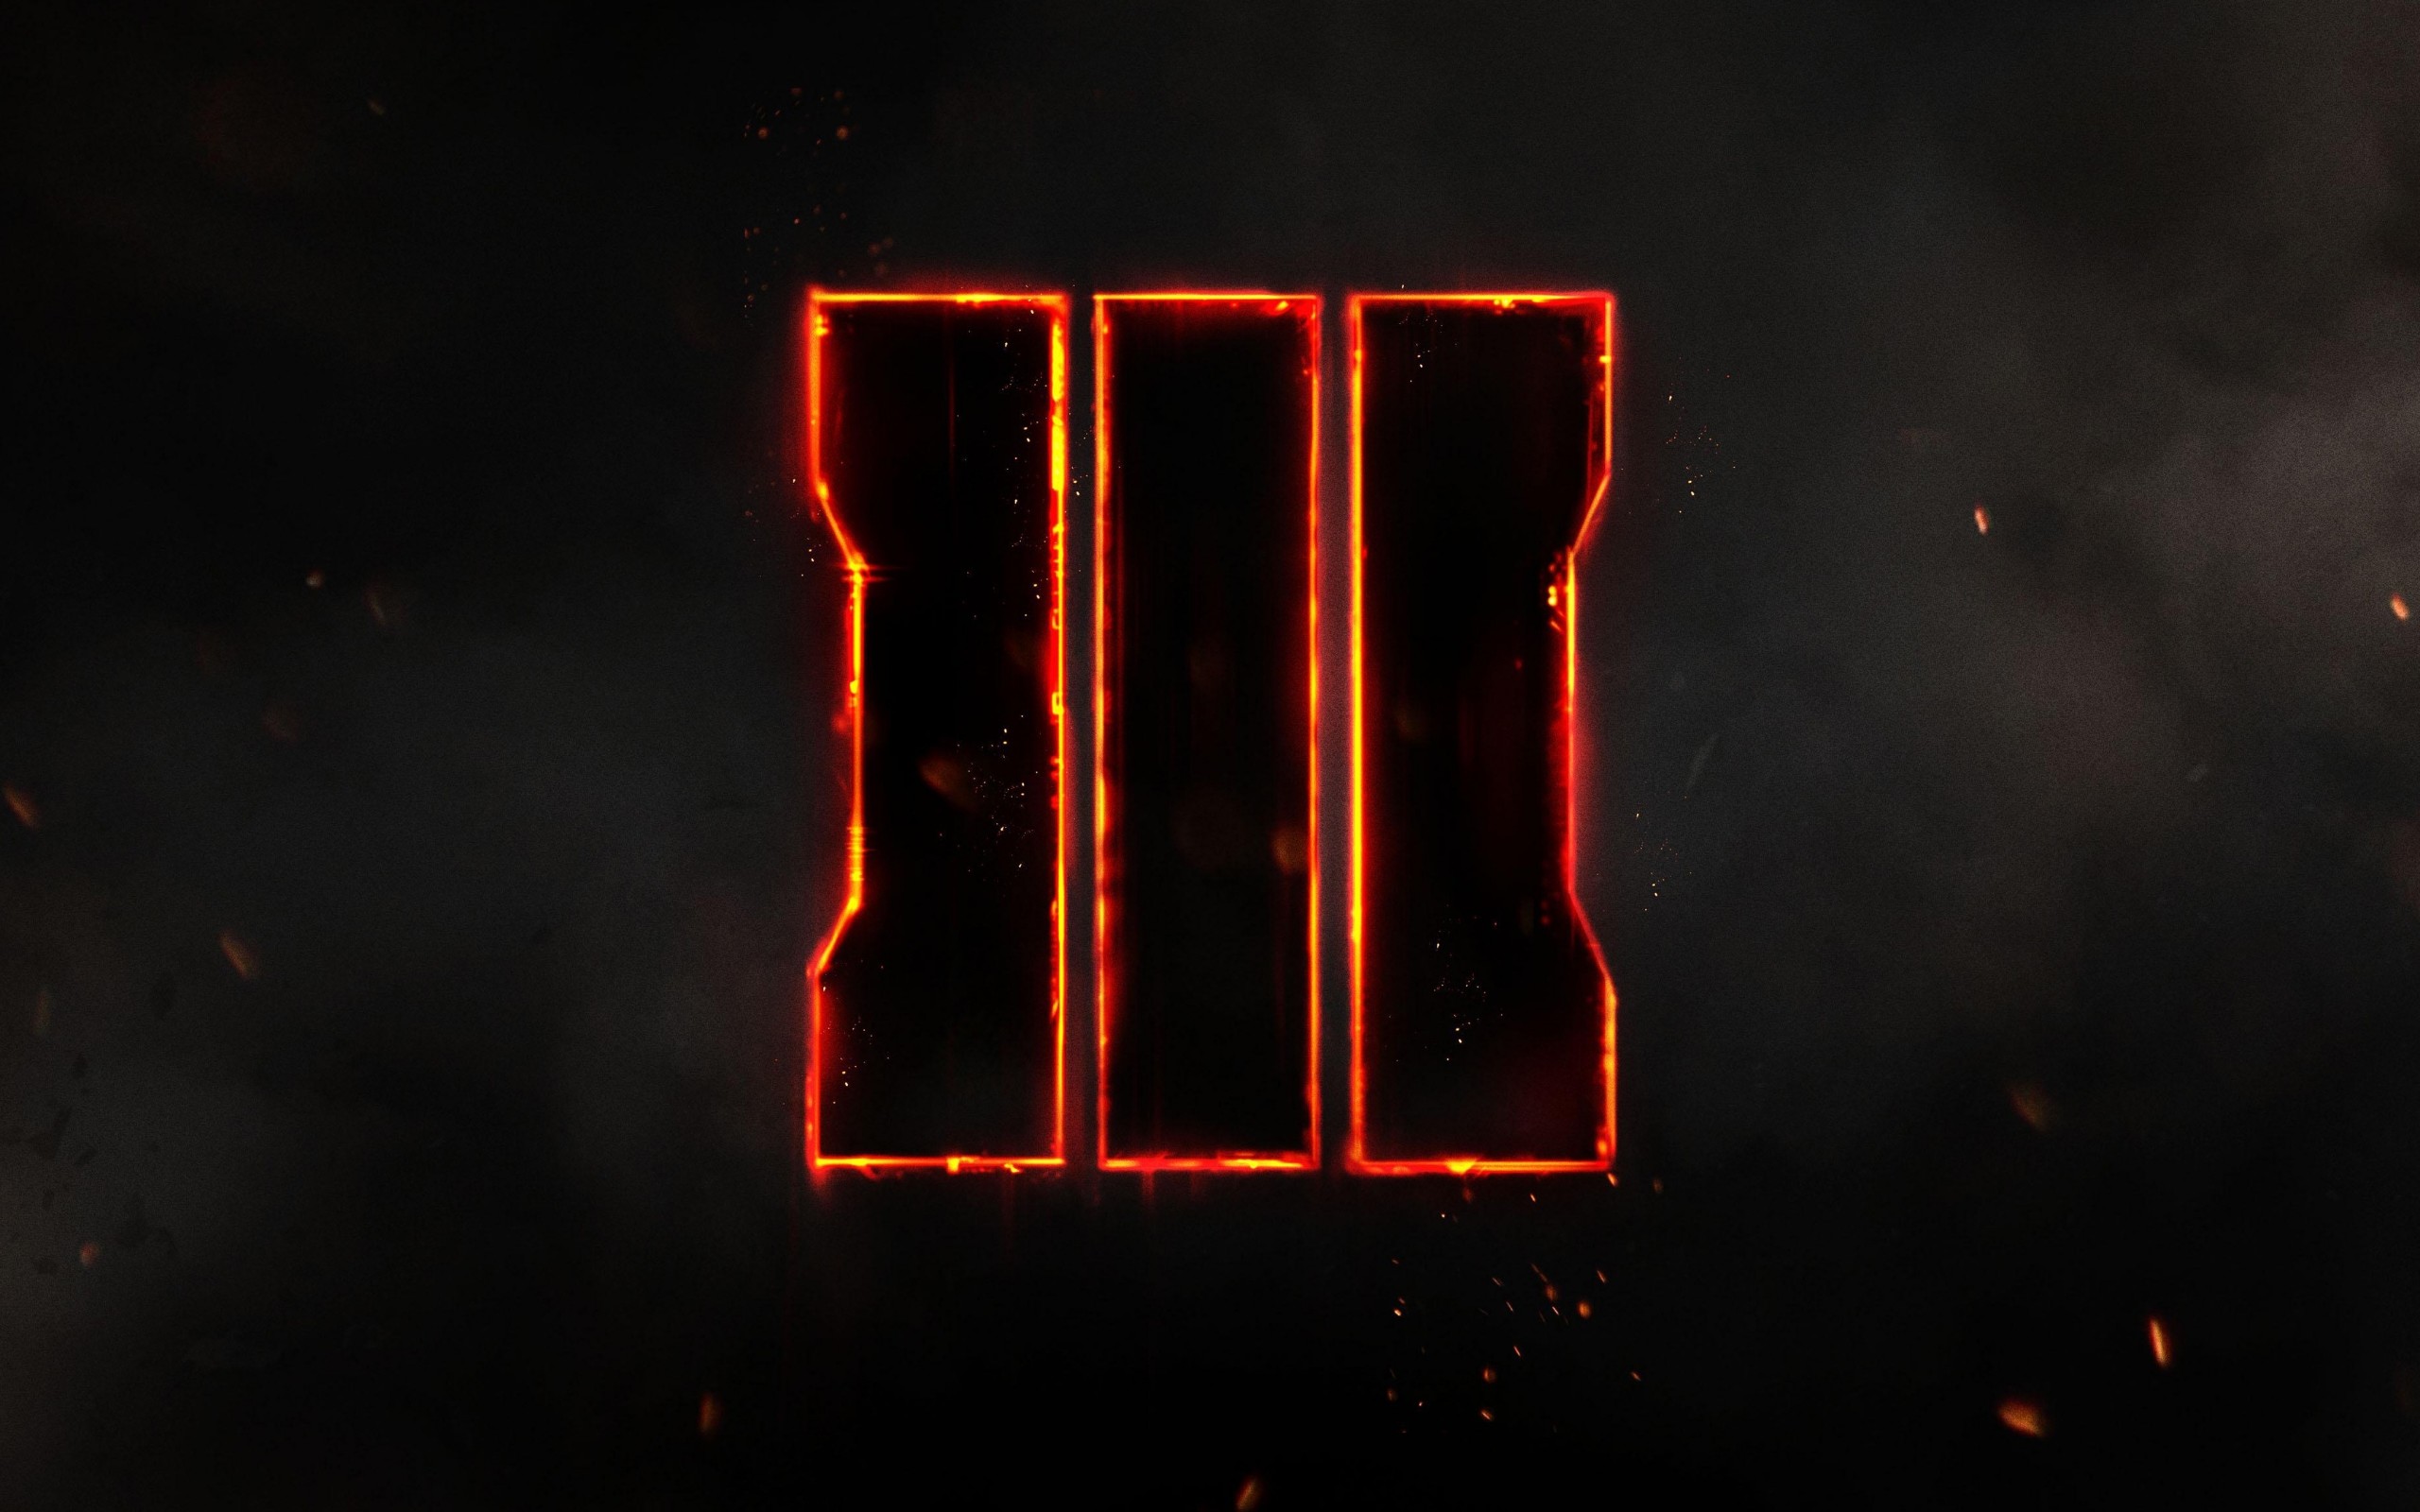 70 Call Of Duty Black Ops Iii Hd Wallpapers Backgrounds